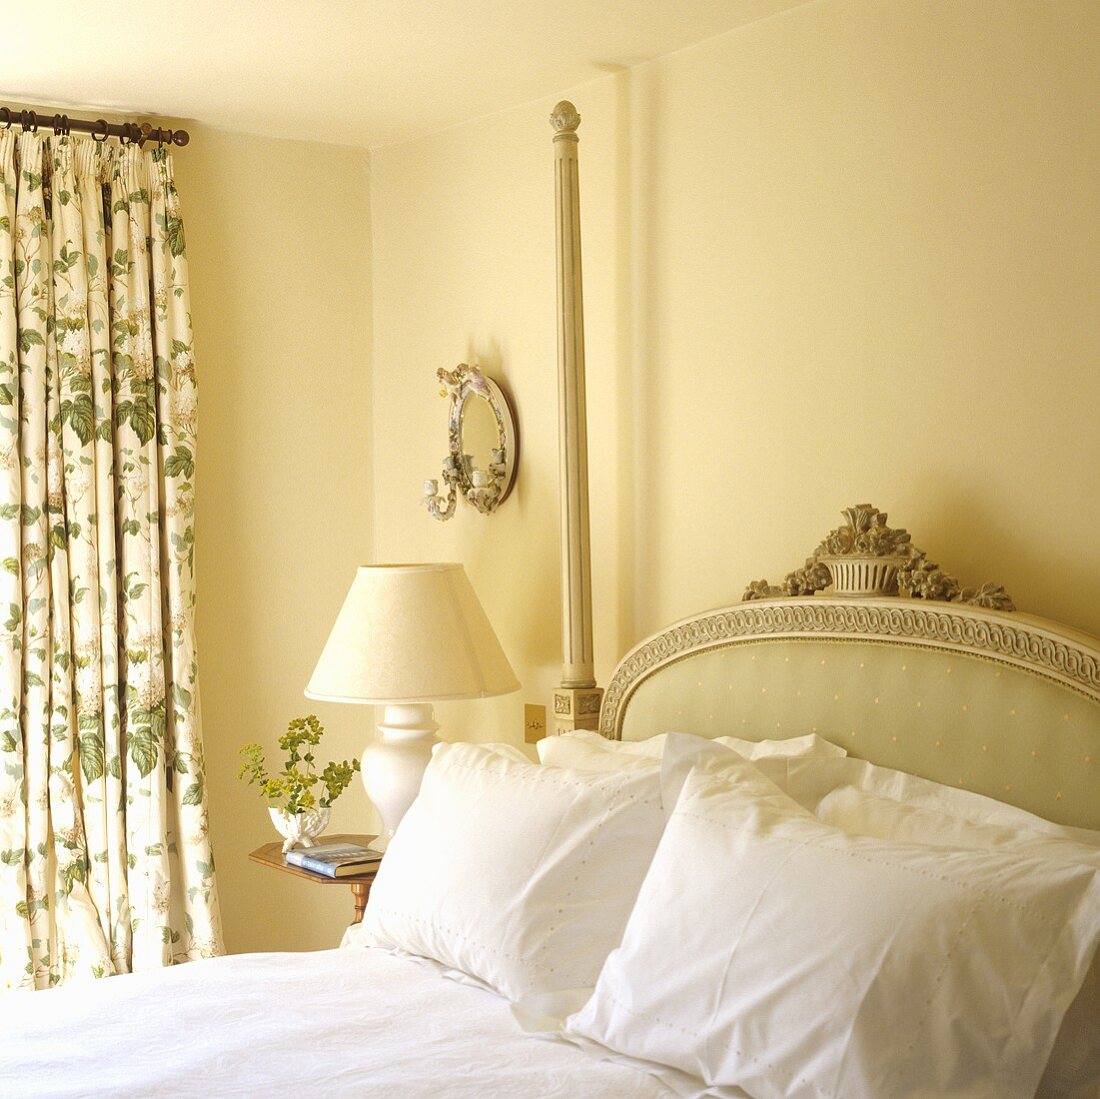 An antique bed with a padded headboard in a yellow-painted bedroom